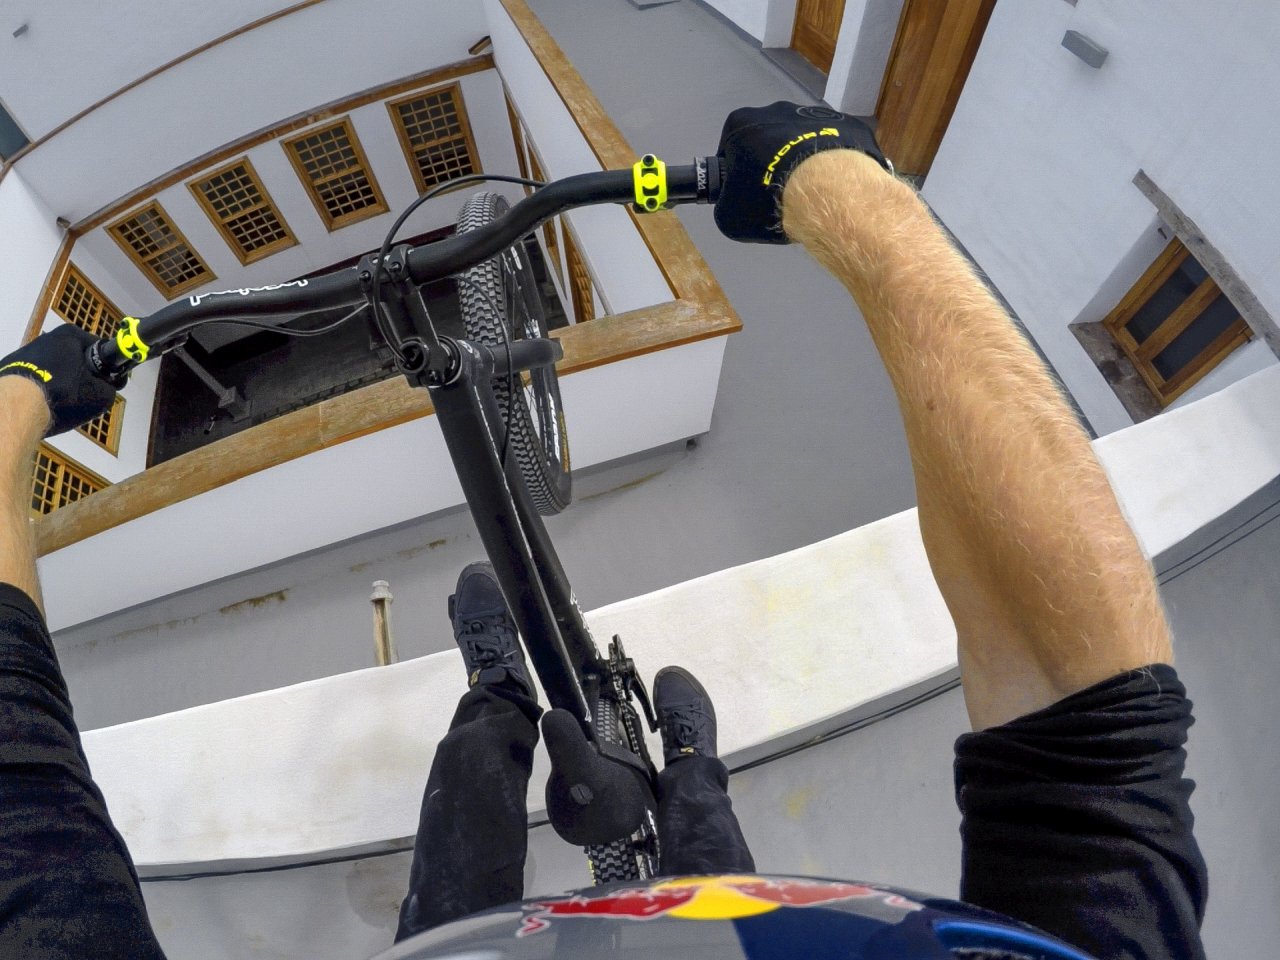 Street trials rider Danny MacAskill riding his bike across the rooftops of picturesque Gran Canaria, Spain for his “Cascadia” video. Photo: RedBull Content Pool